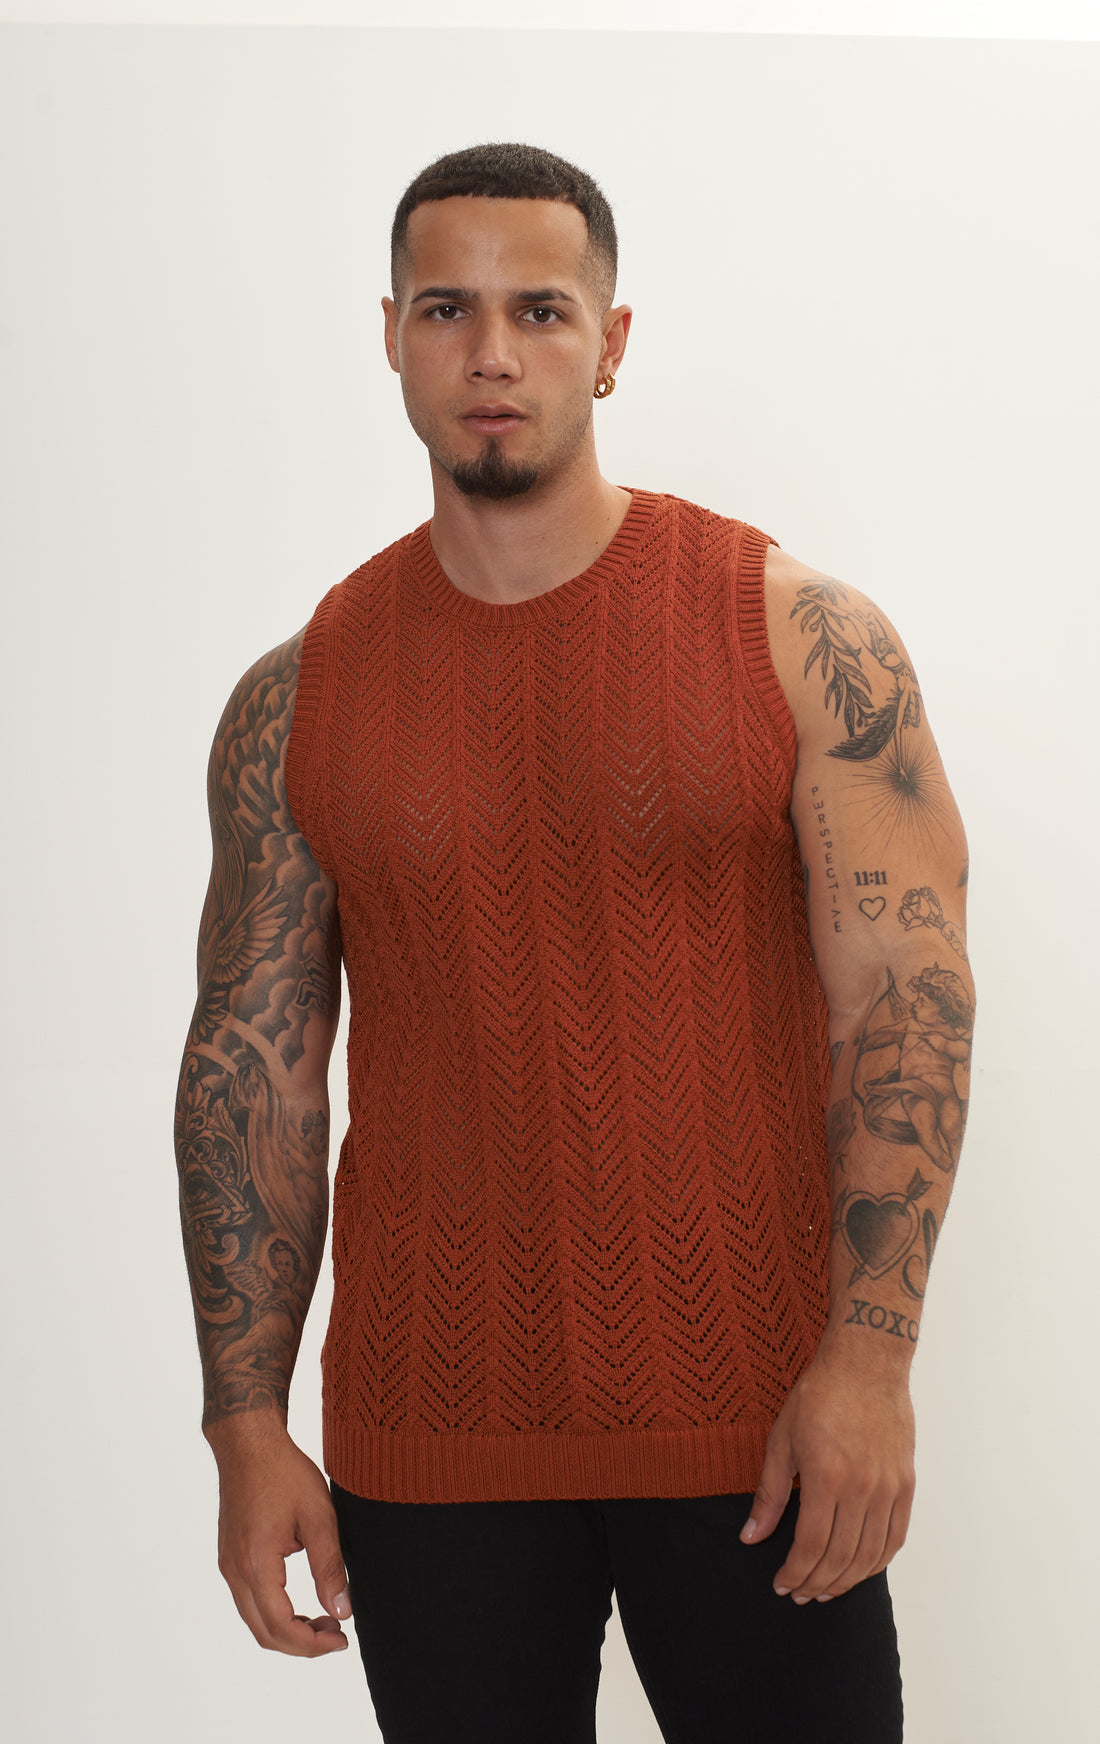 Muscle Fit Tank Top - Tile